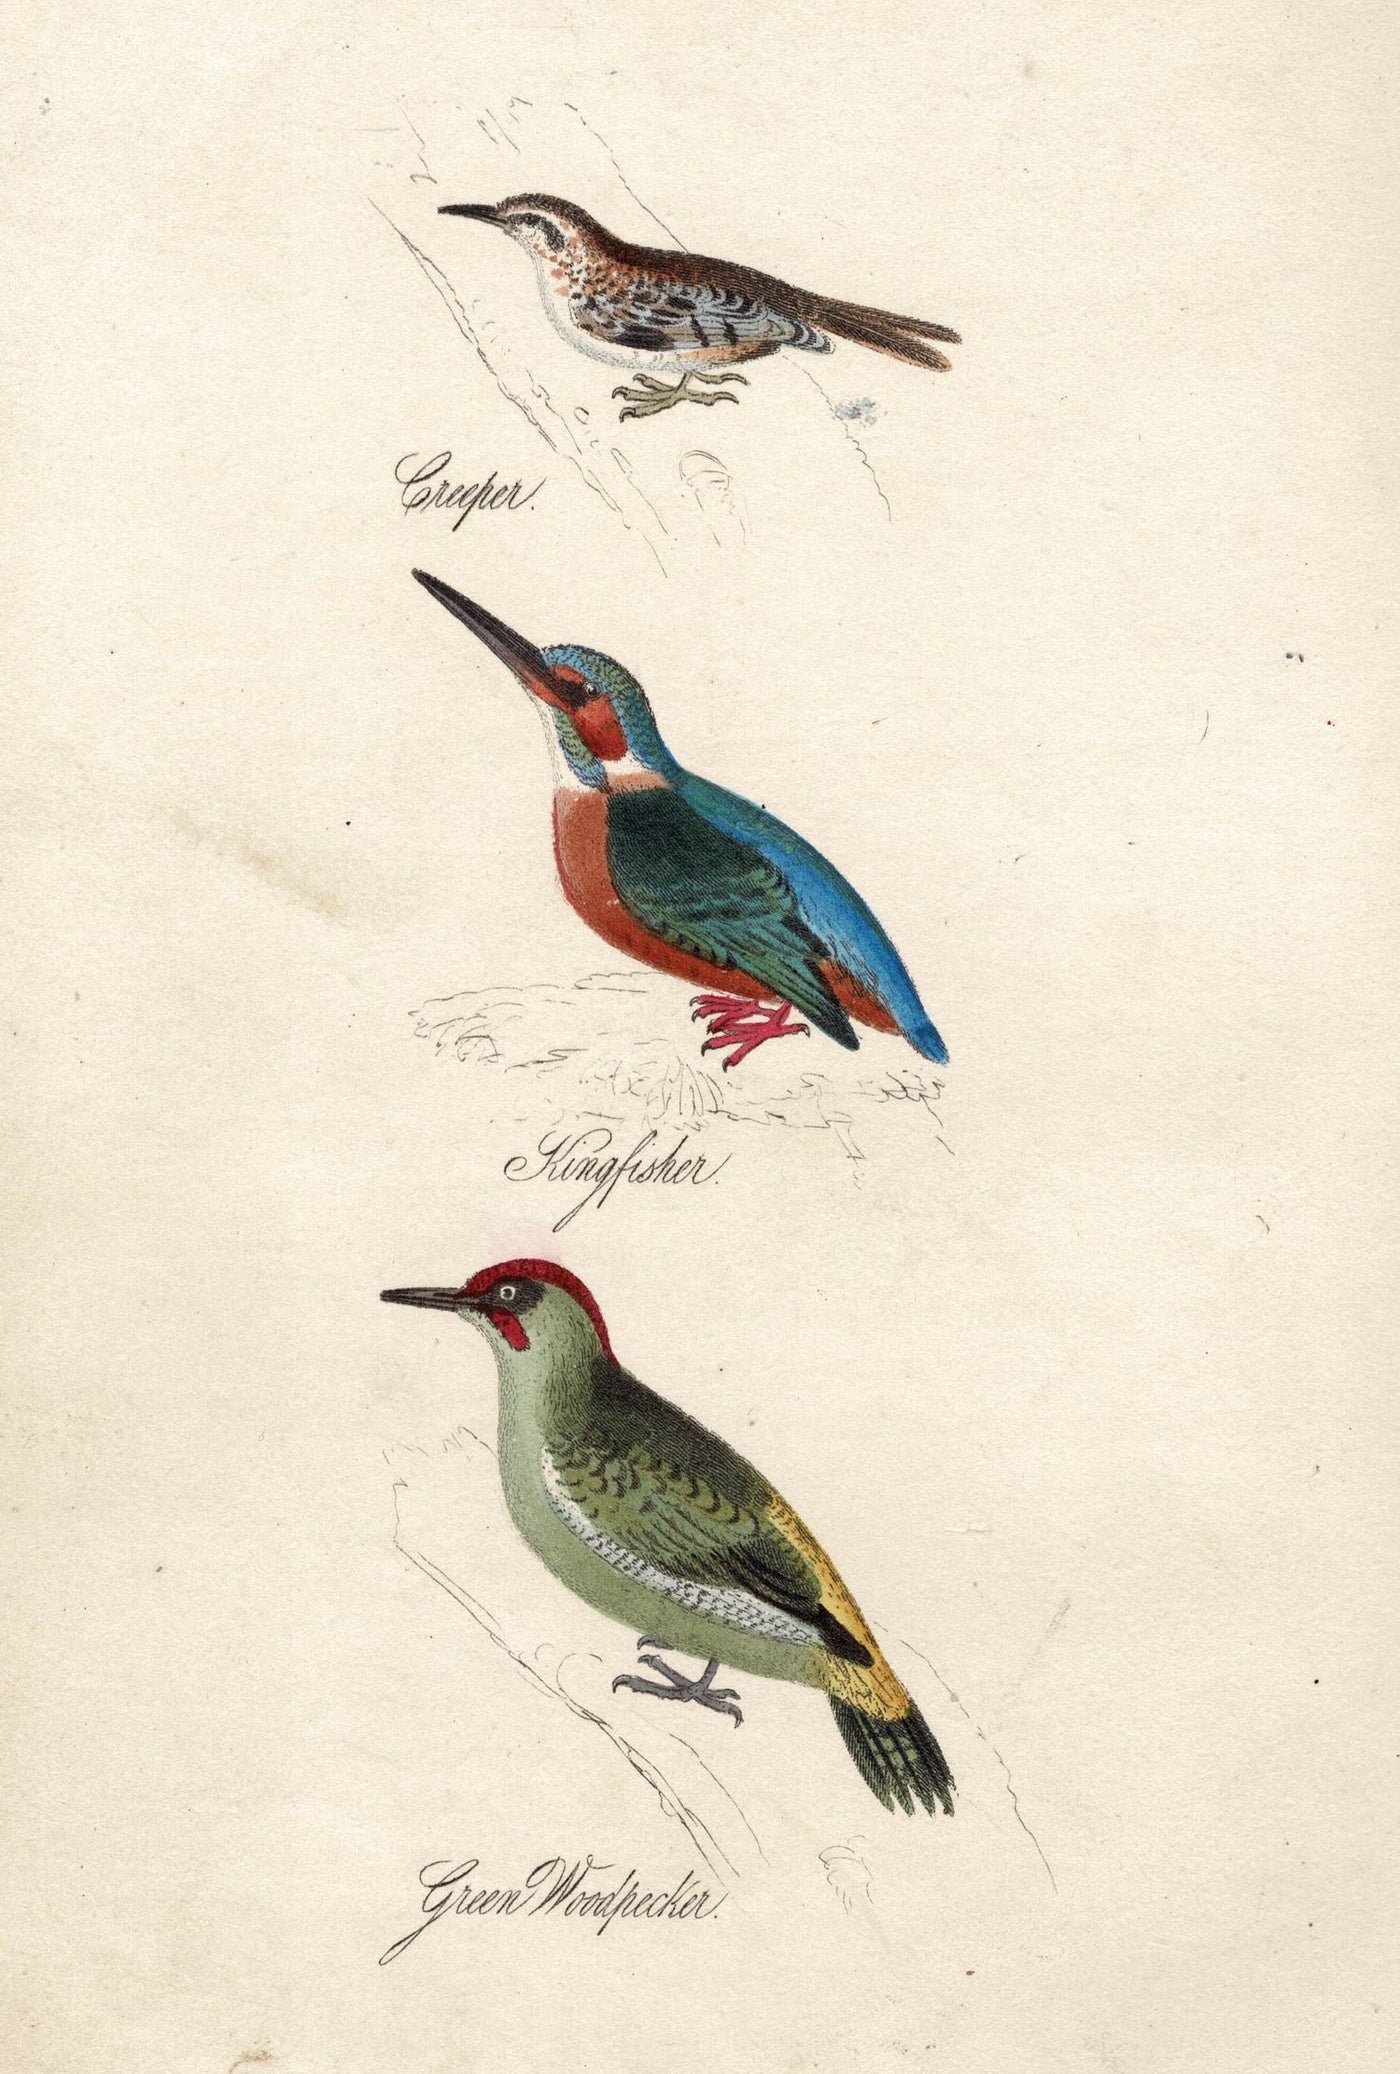 Creeper, Kingfisher, Green Woodpecker antique print published 1834